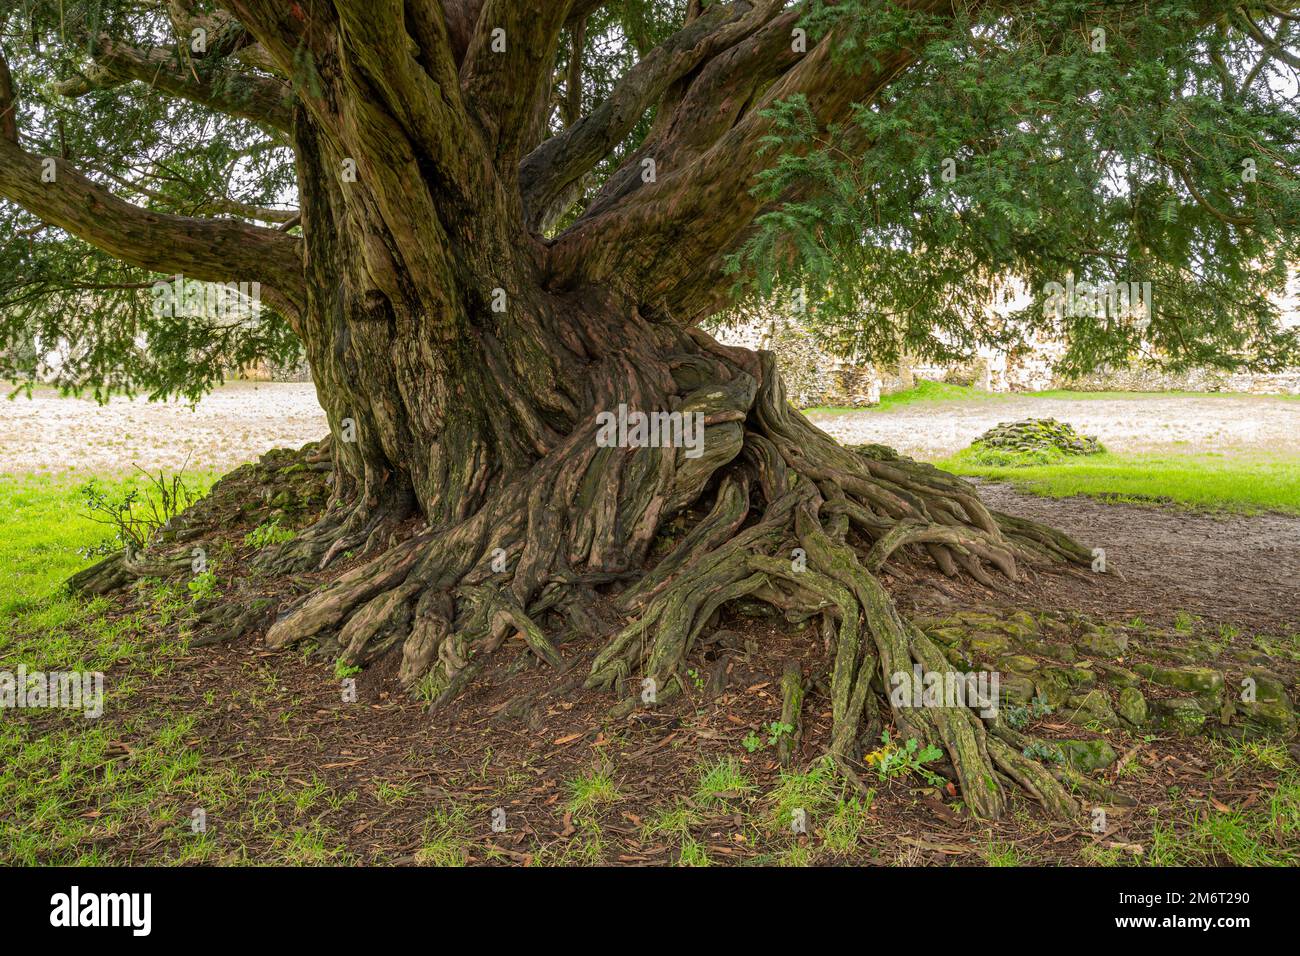 The Waverley Abbey Yew An Ancient Yew Tree Voted 2022 Tree Of The Year In Surrey England Uk 2M6T290 